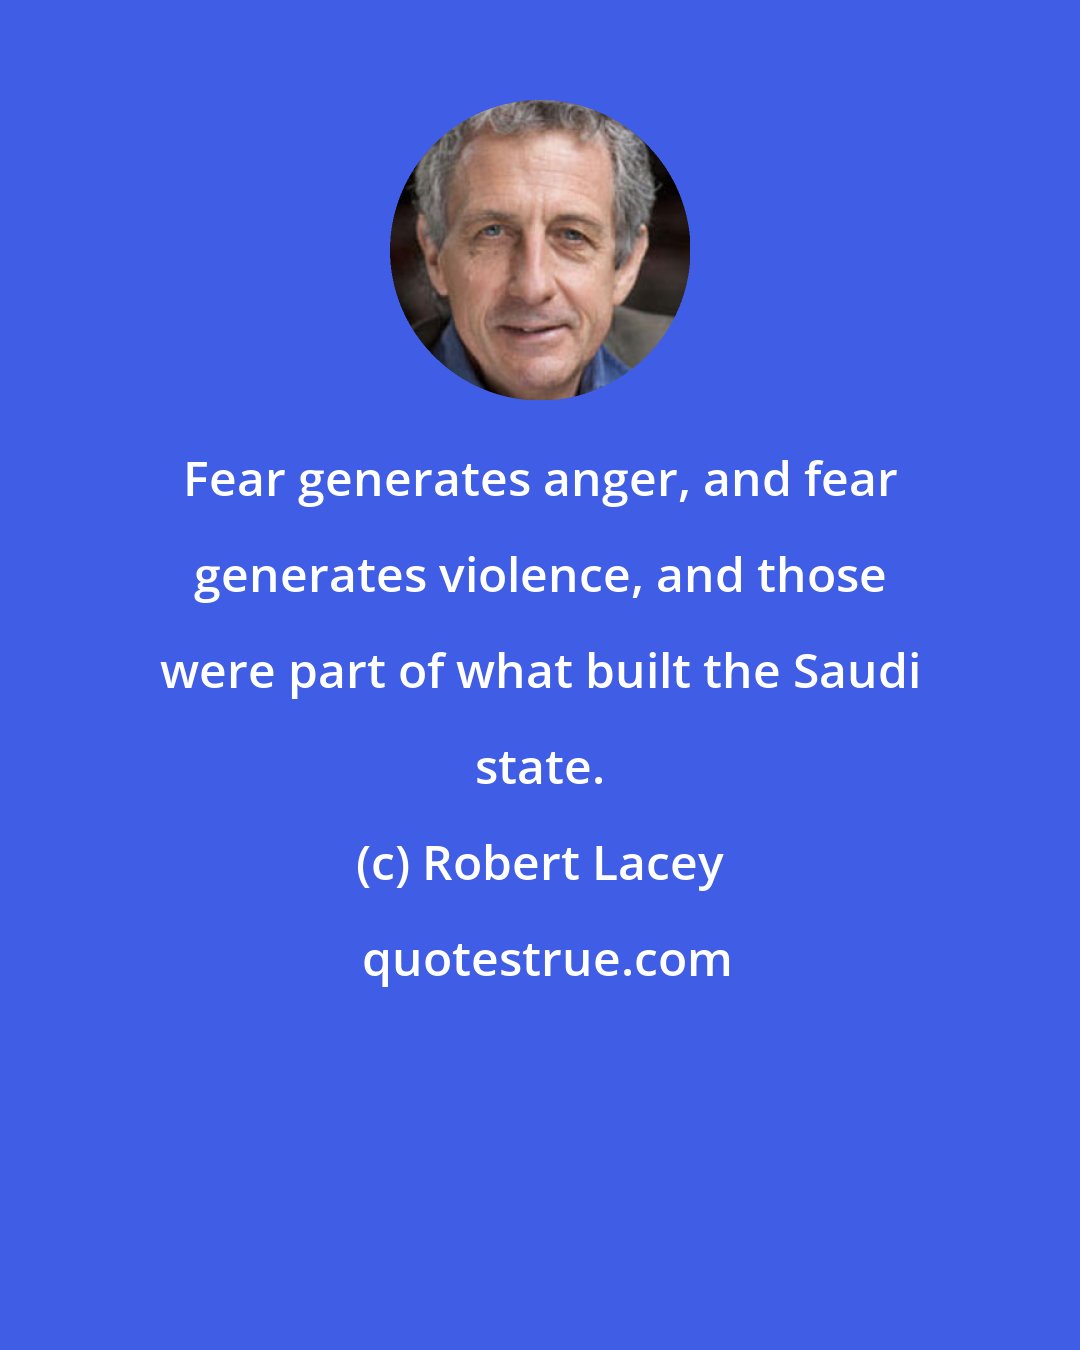 Robert Lacey: Fear generates anger, and fear generates violence, and those were part of what built the Saudi state.